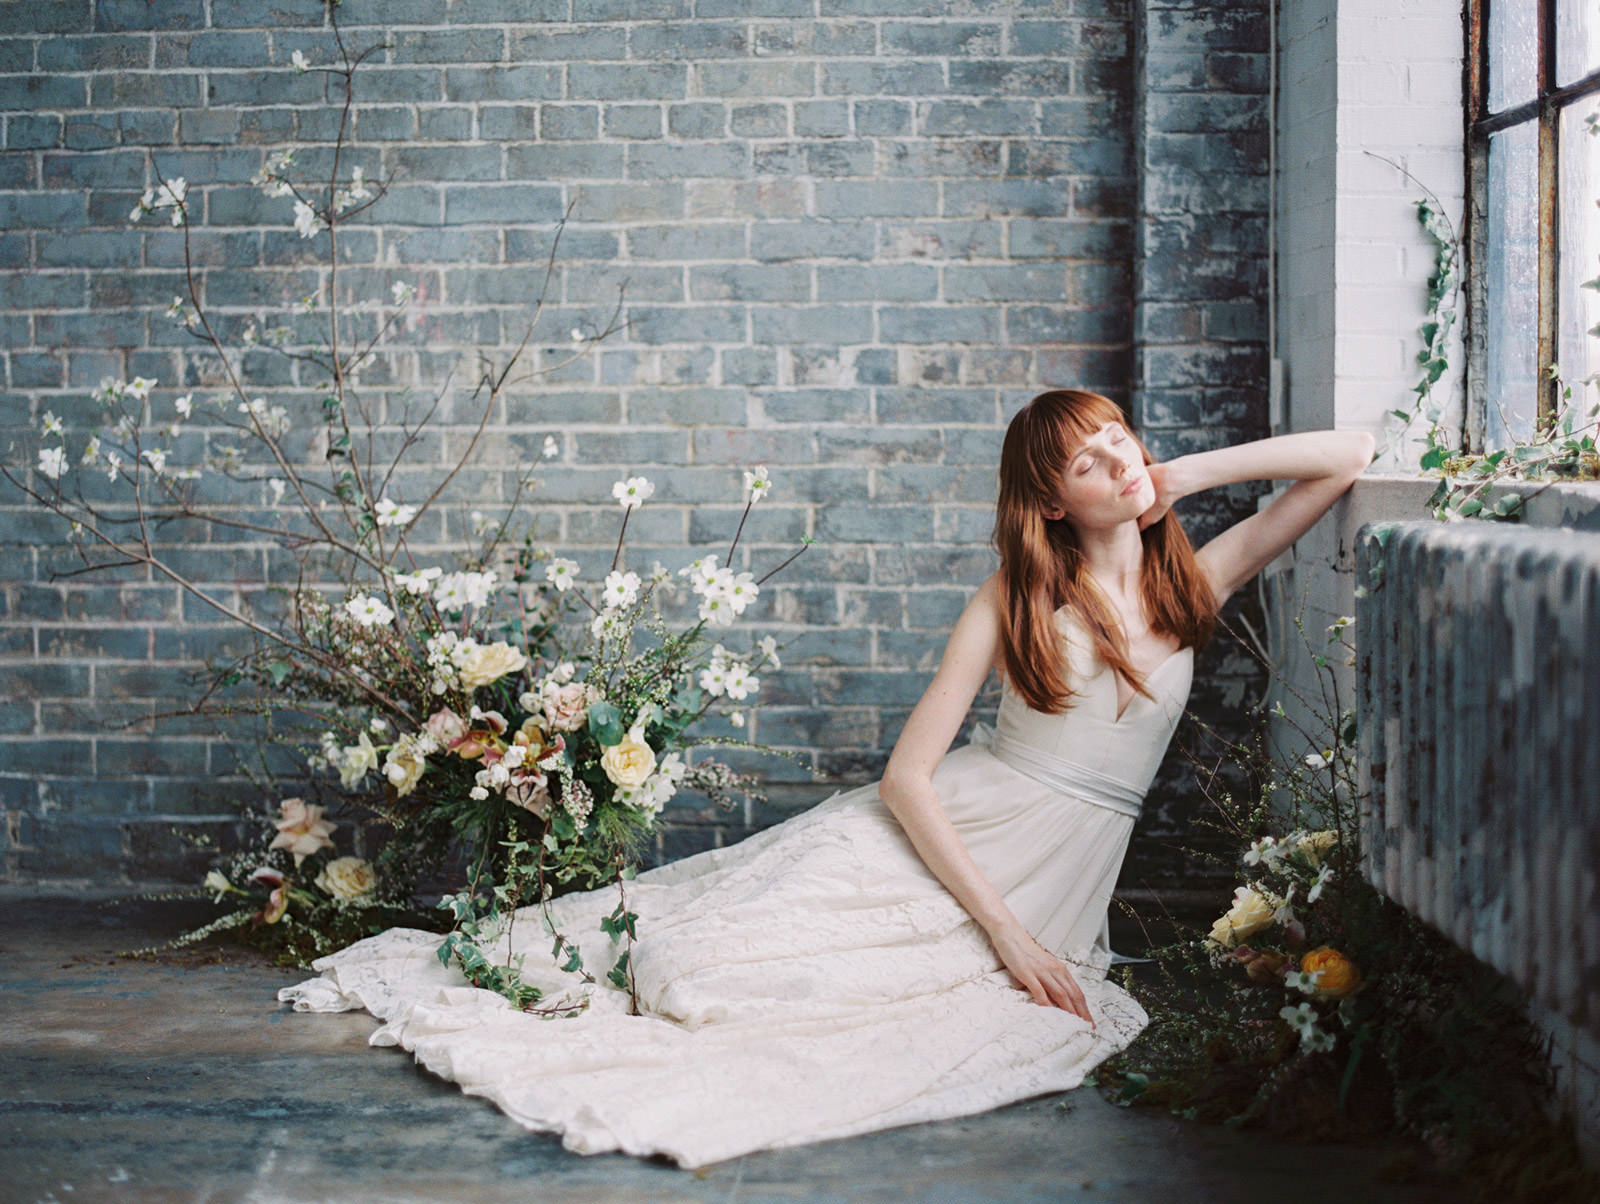 these wedding dresses are adorable, subtle and beautiful, these are perfect ones for the spring and summer